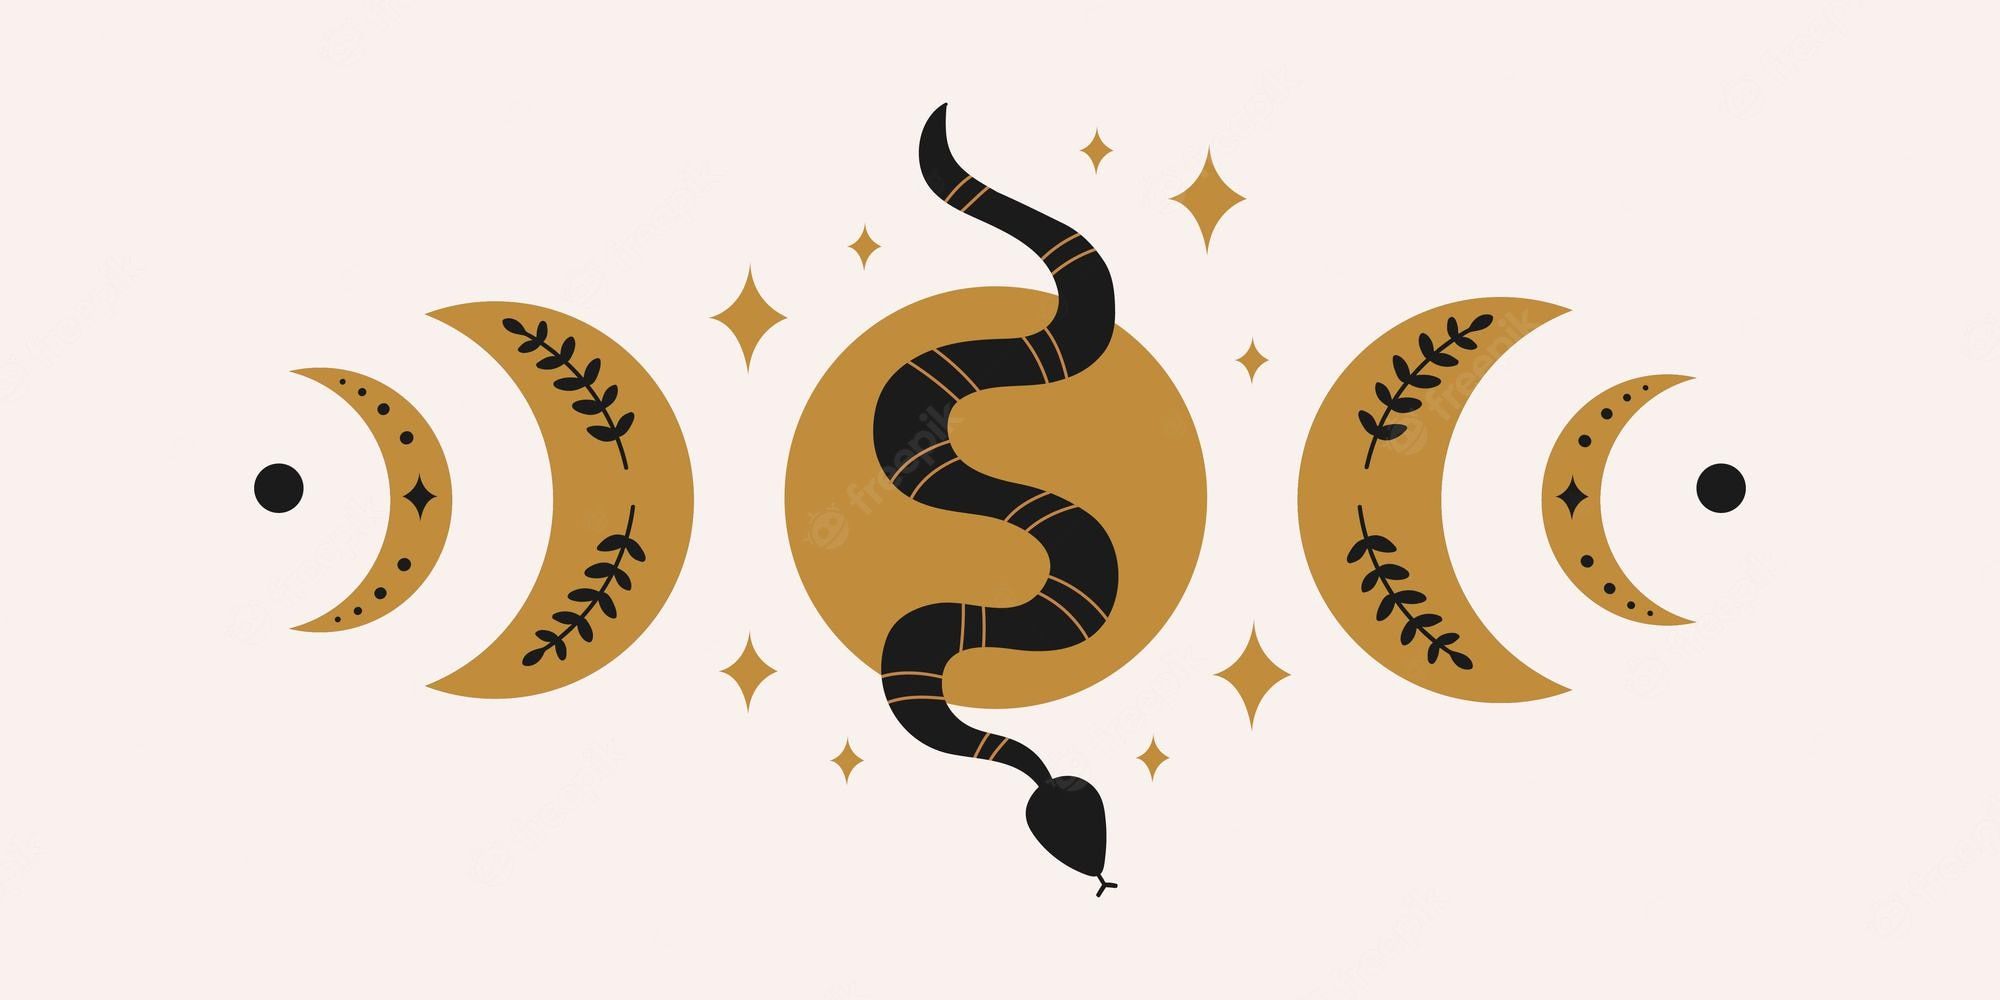 A snake and moon with stars on it - Moon phases